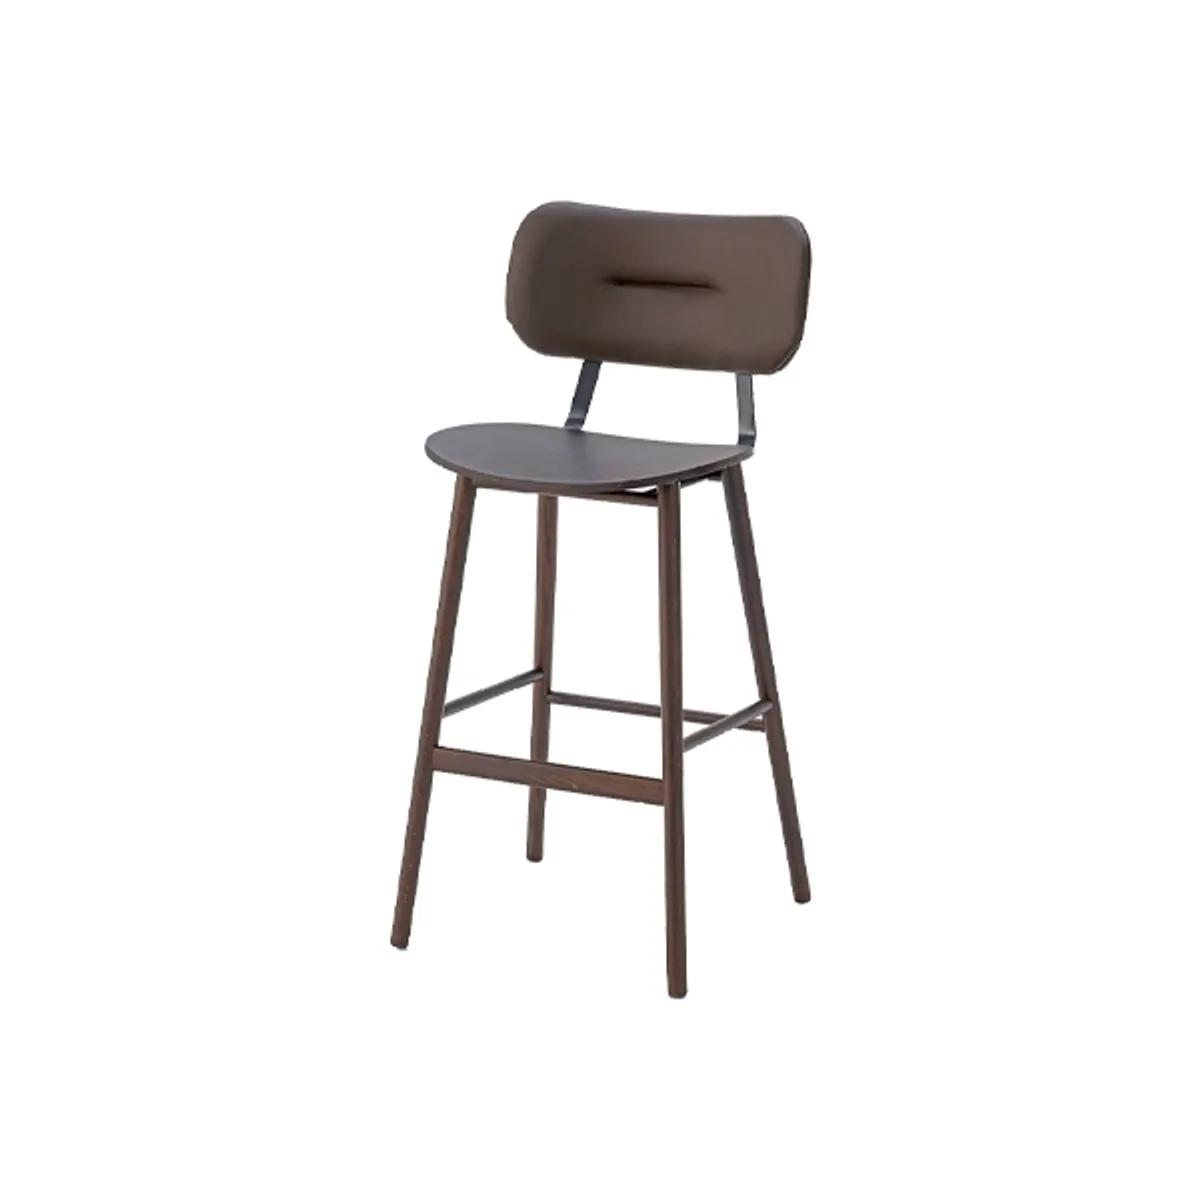 Demie bar stool Inside Out Contracts4